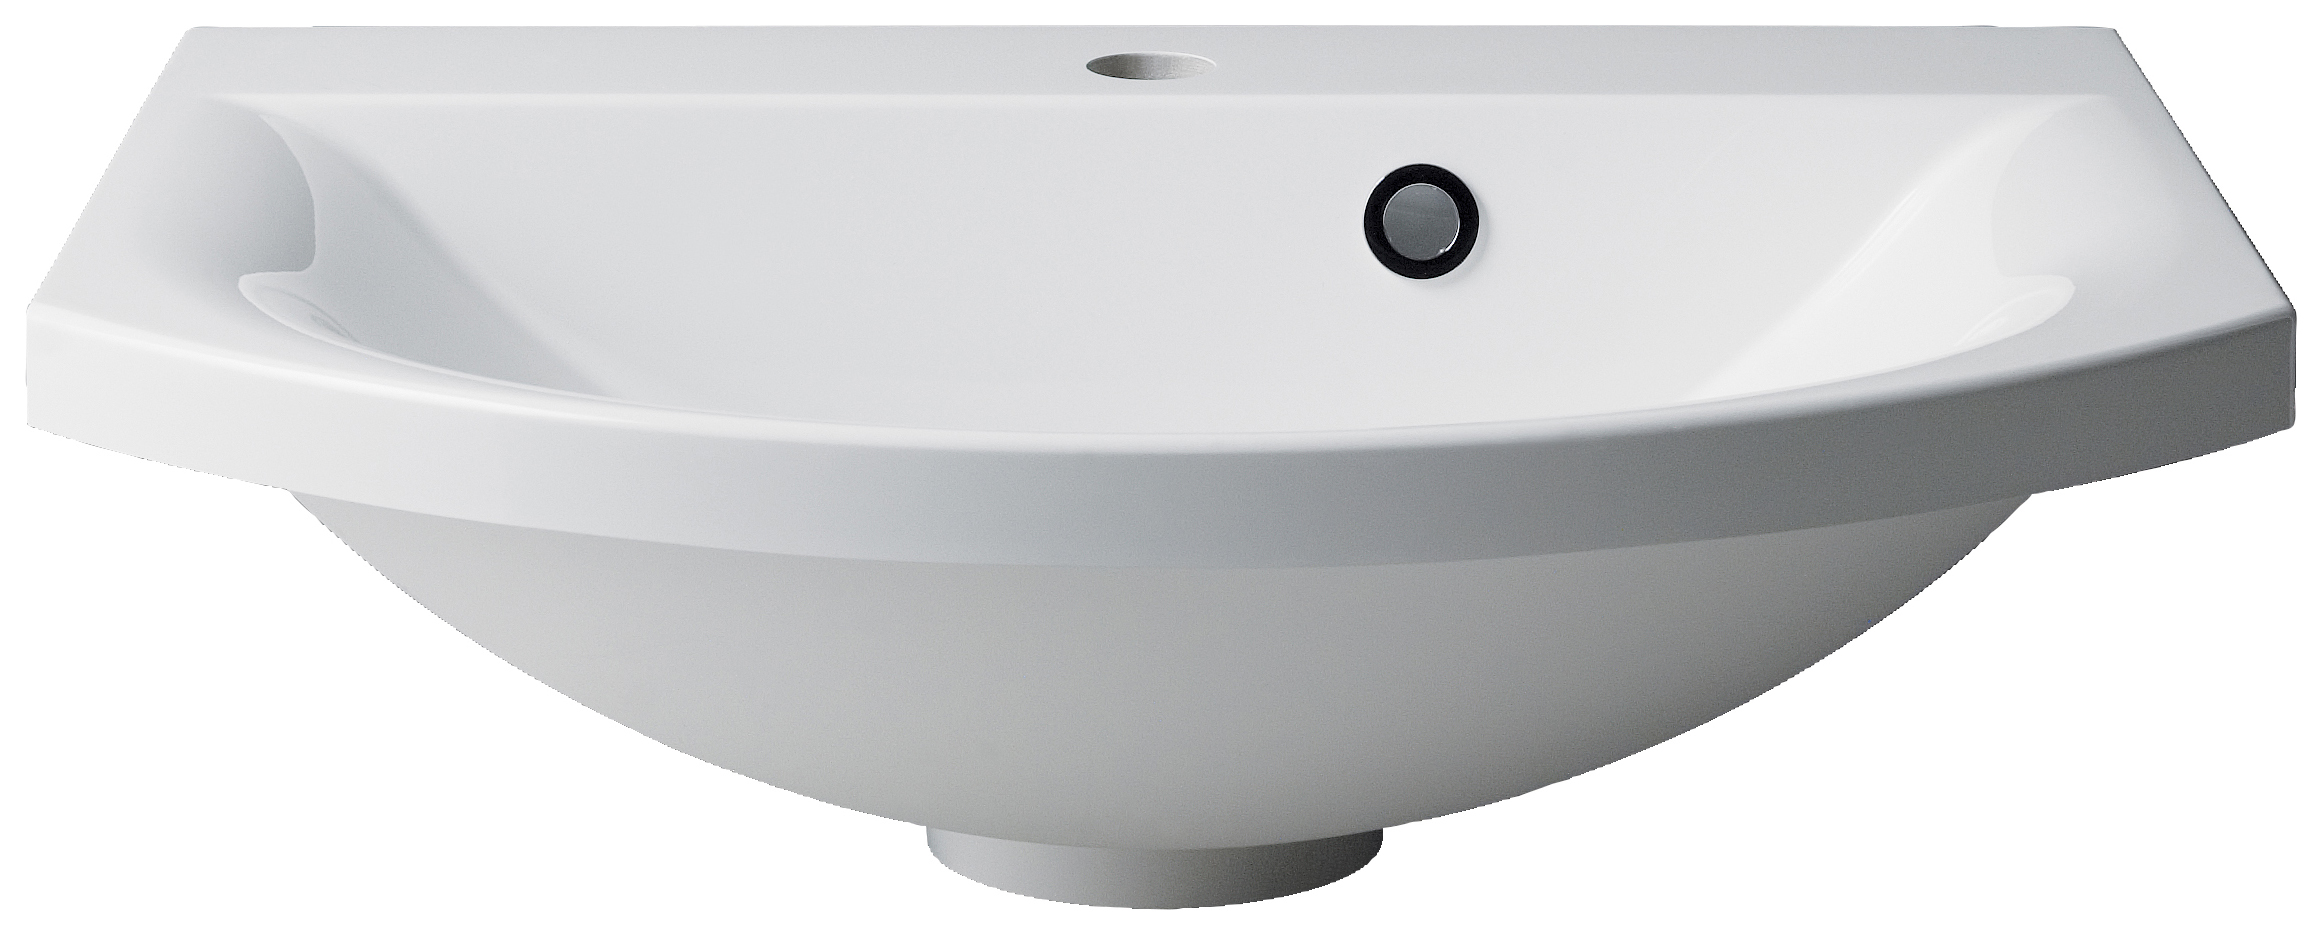 Image of Duarti By Calypso Belmont Semi Recessed Cast Marble Vanity Basin - 544mm